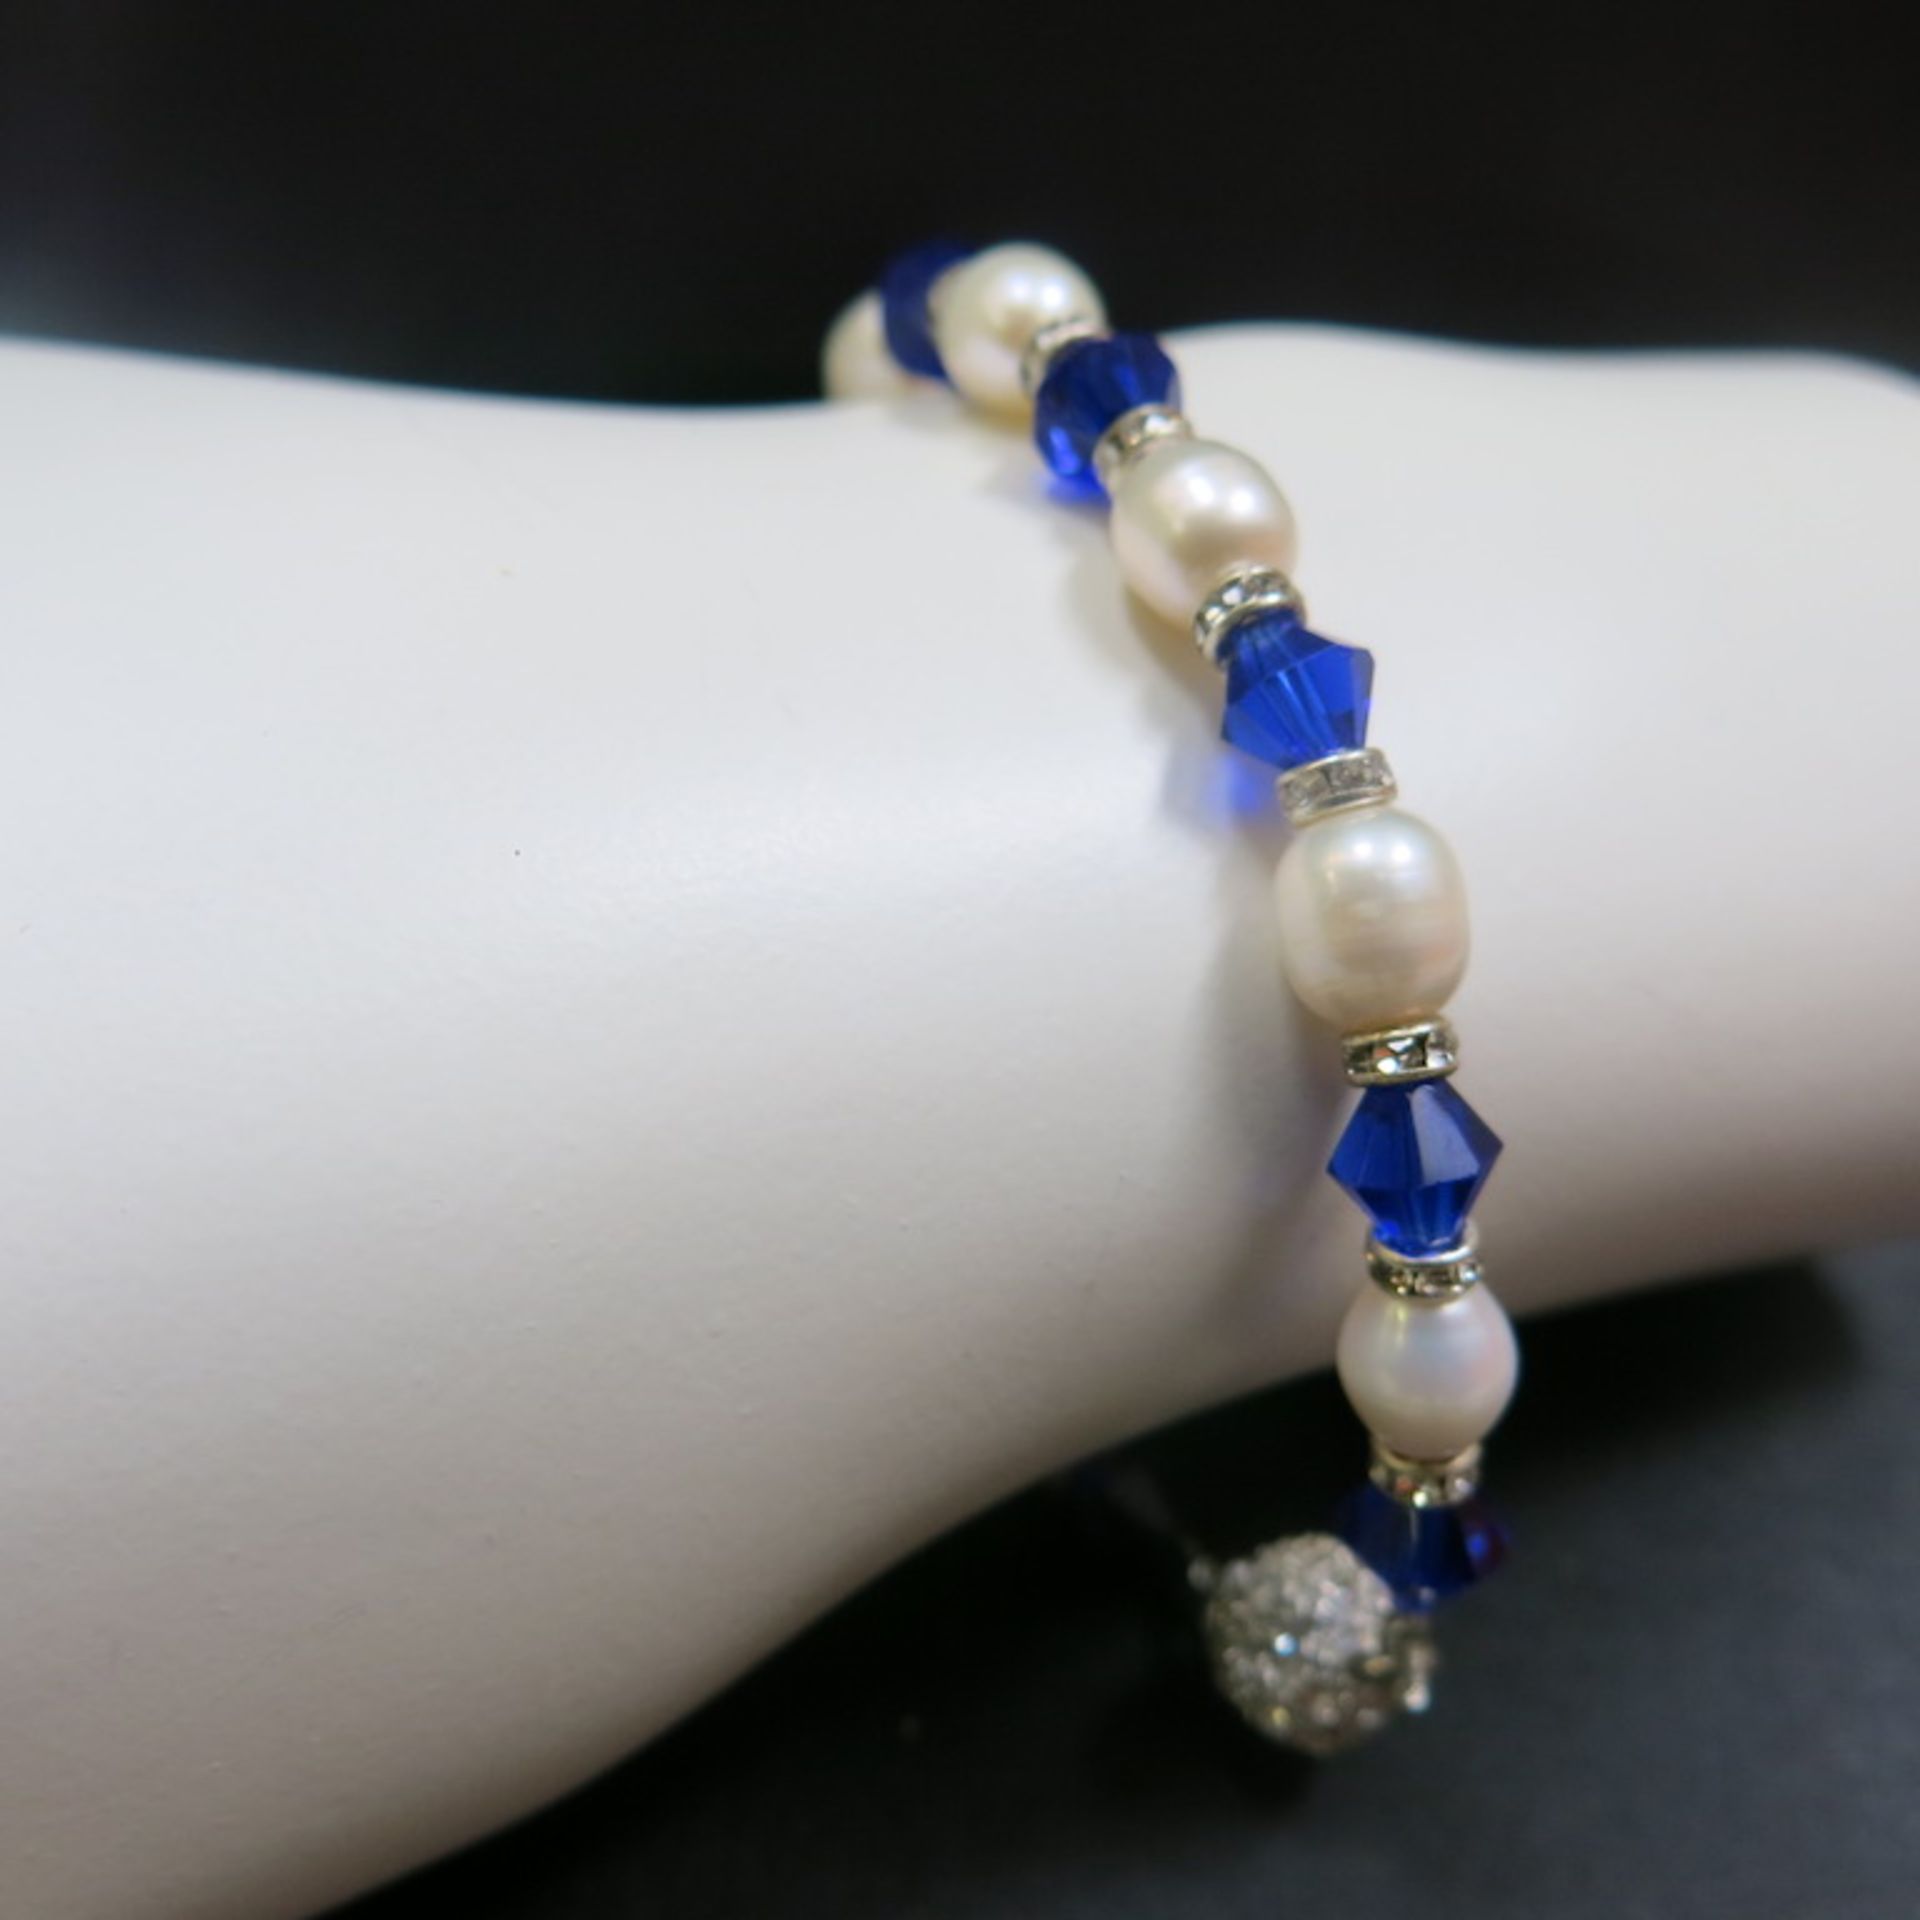 Pearl Bracelet (6.5mm) with Blue & Clear Stone Detail. Magnetic Clasp. RRP £58.00